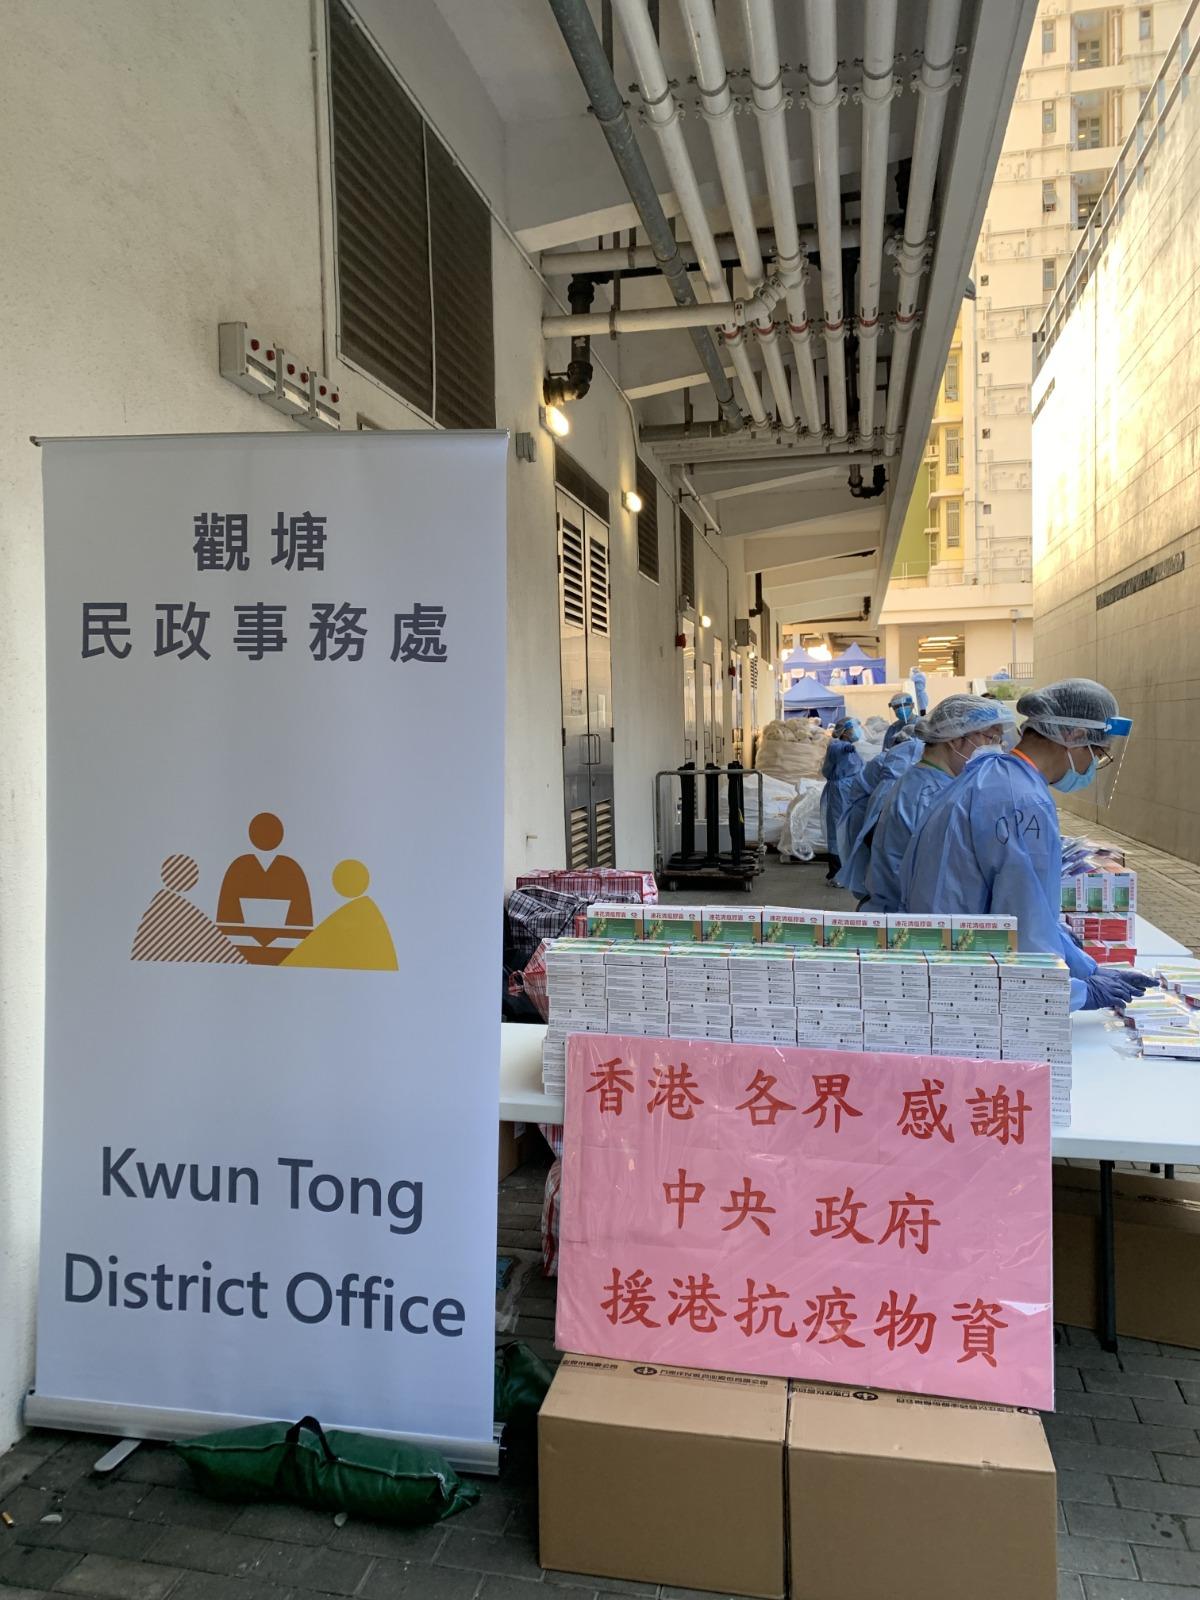 The Government yesterday (March 11) made a "restriction-testing declaration" and issued a compulsory testing notice in respect of the specified "restricted area" in Kwun Tong (i.e. Chun Tat House, On Tat Estate, Kwun Tong, excluding On Tat Estate Property Services Management Office and Housing Department Kowloon East (13) District Tenancy Management Office), under which people within the specified "restricted area" in Kwun Tong were required to stay in their premises and undergo compulsory testing. Photo shows the staff preparing to distribute anti-epidemic proprietary Chinese medicines supplied by the Central People's Government to persons subject to compulsory testing in the "restricted area".